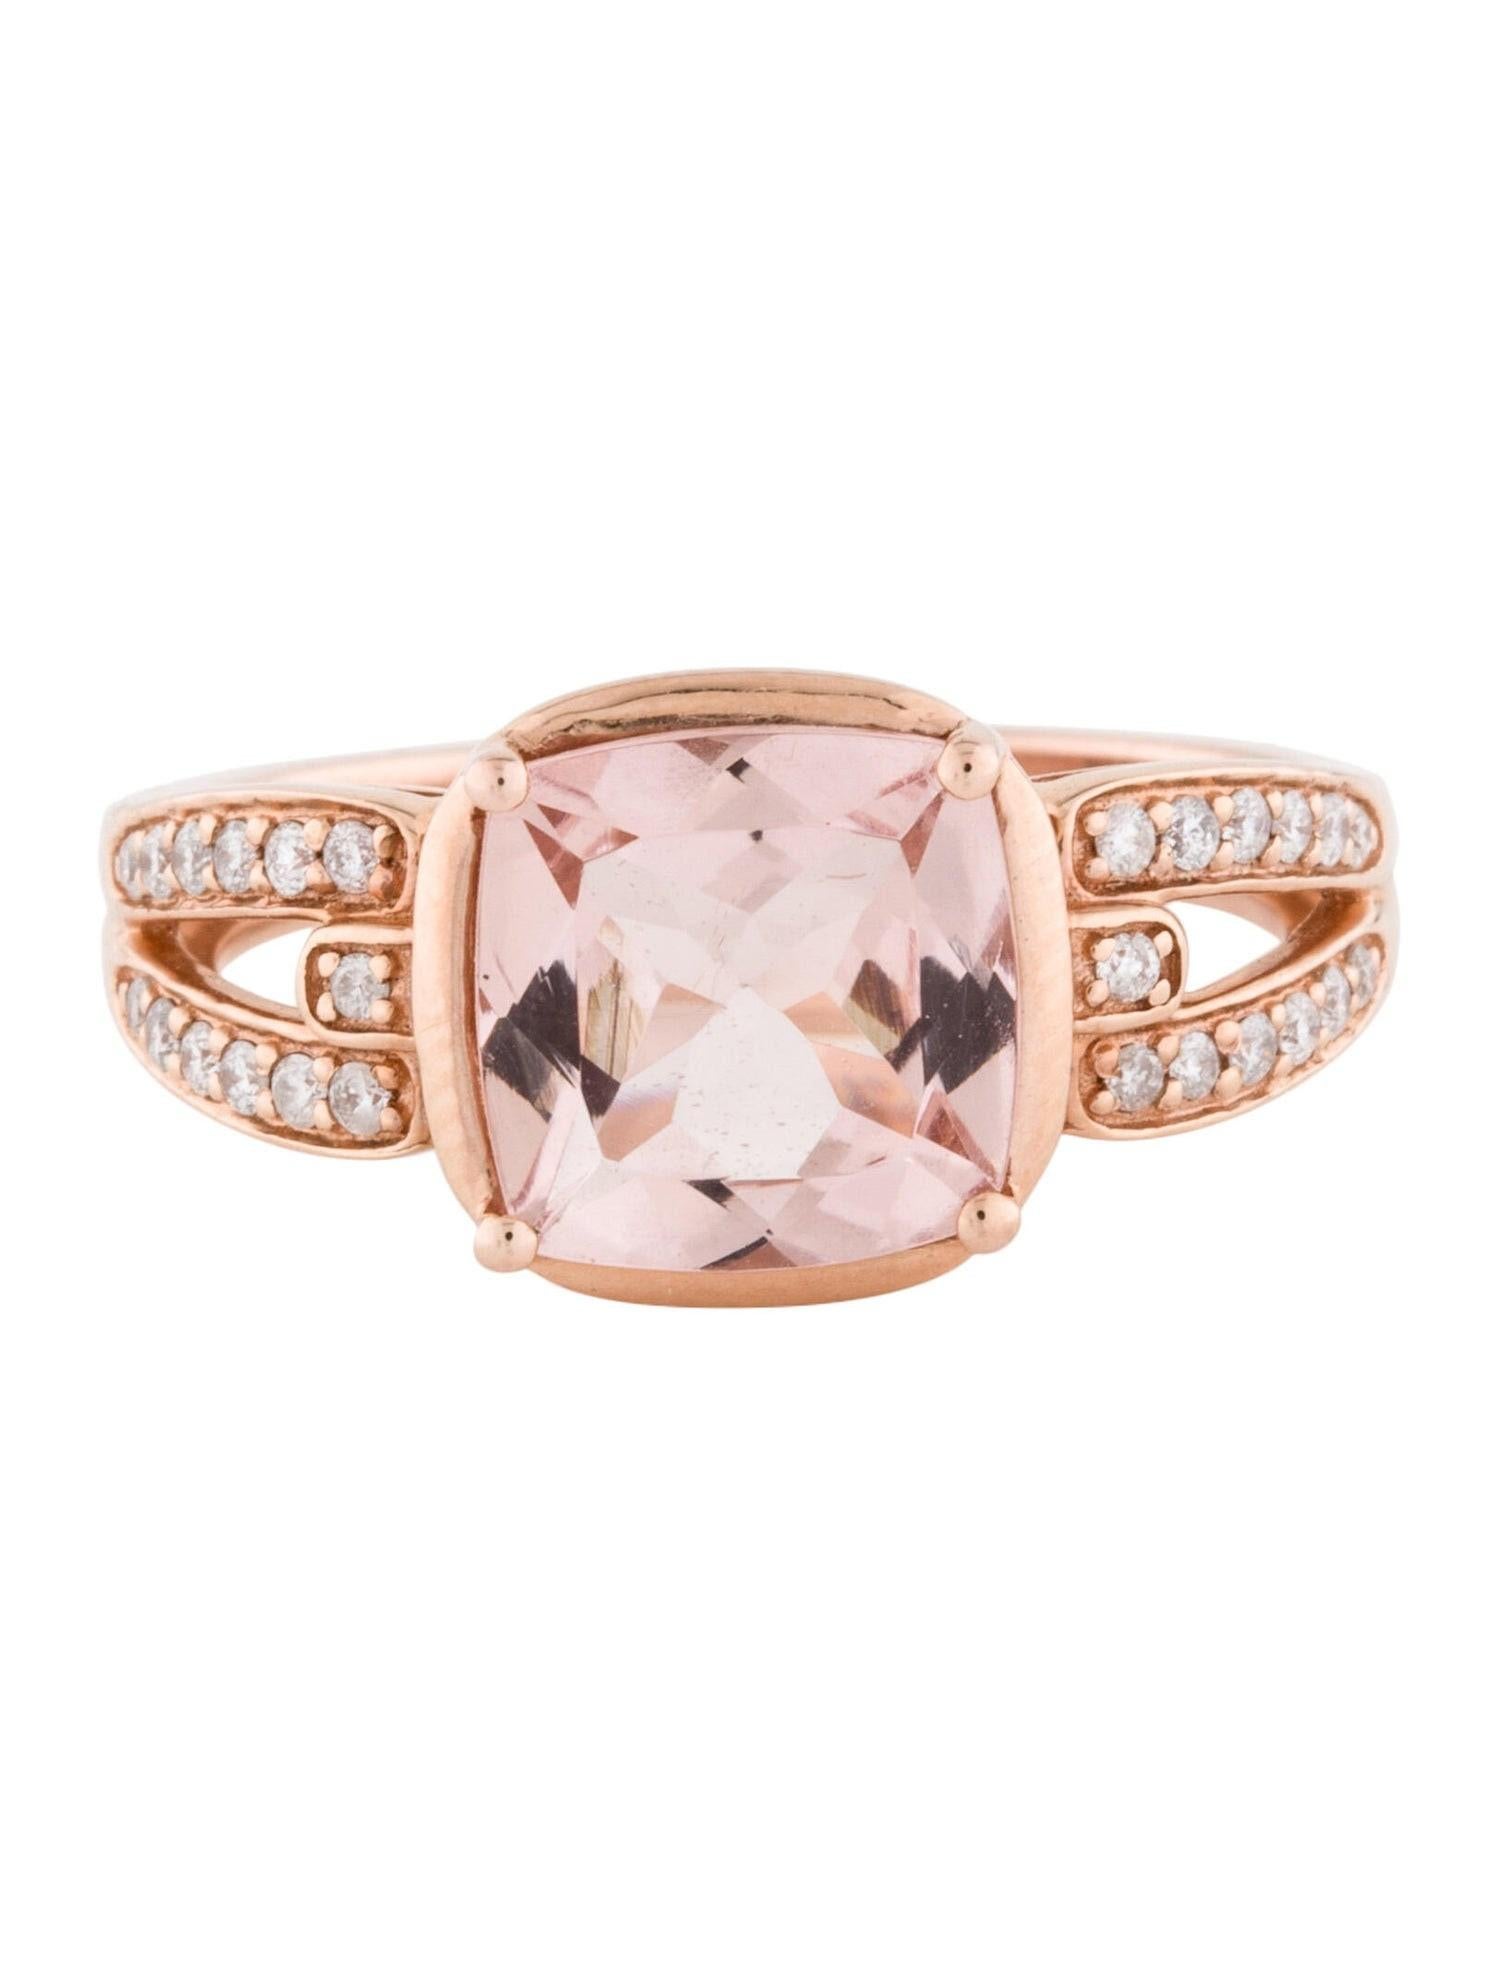 Contemporary 14K Rose Gold Morganite & Diamond Cocktail Ring For Sale